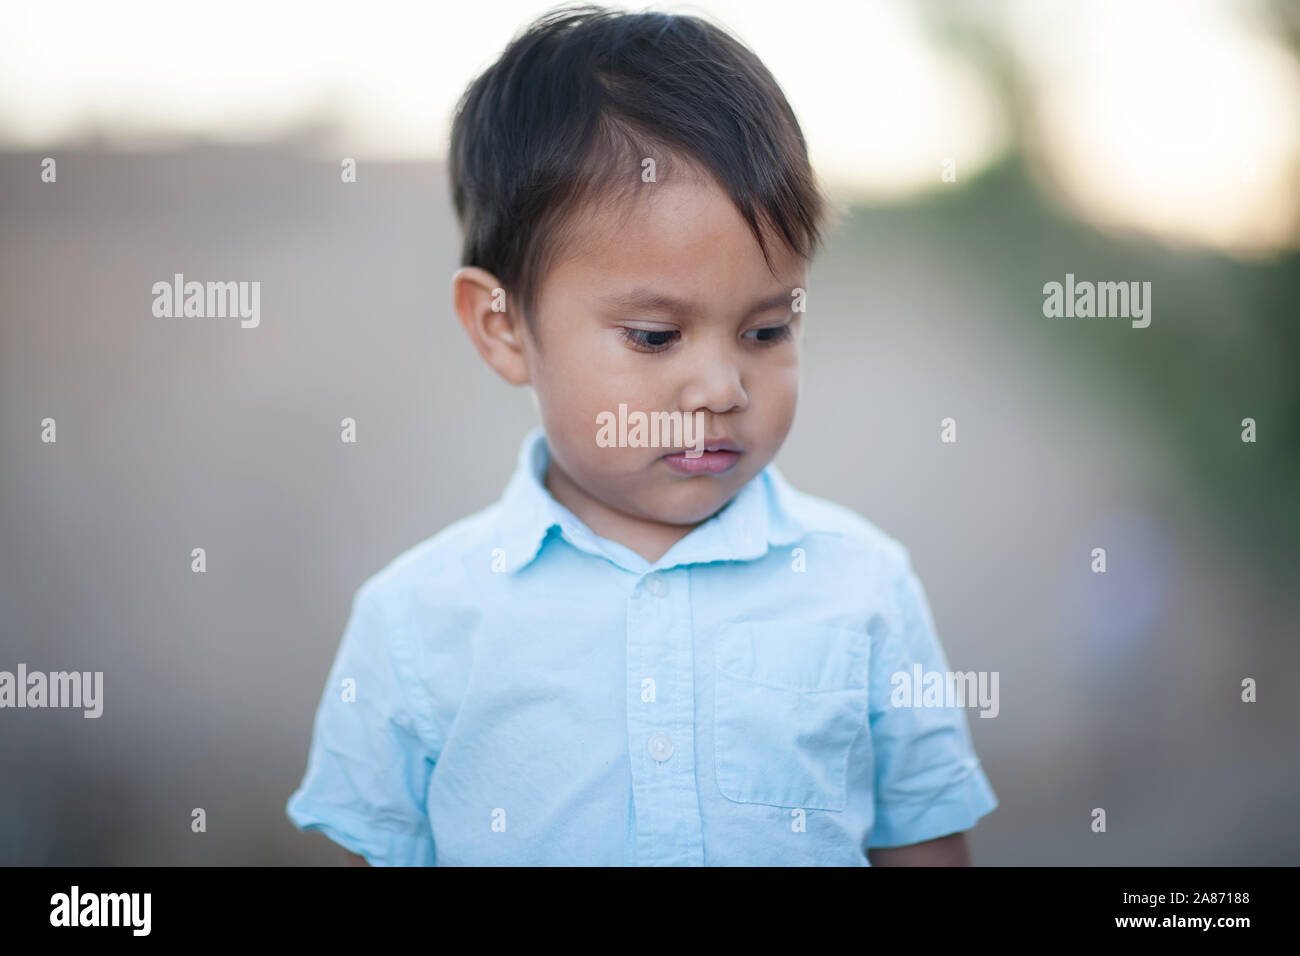 A little boy whose look is characterized by the examination of his own thoughts and feelings, withdrawn and unaware of the external world. Stock Photo